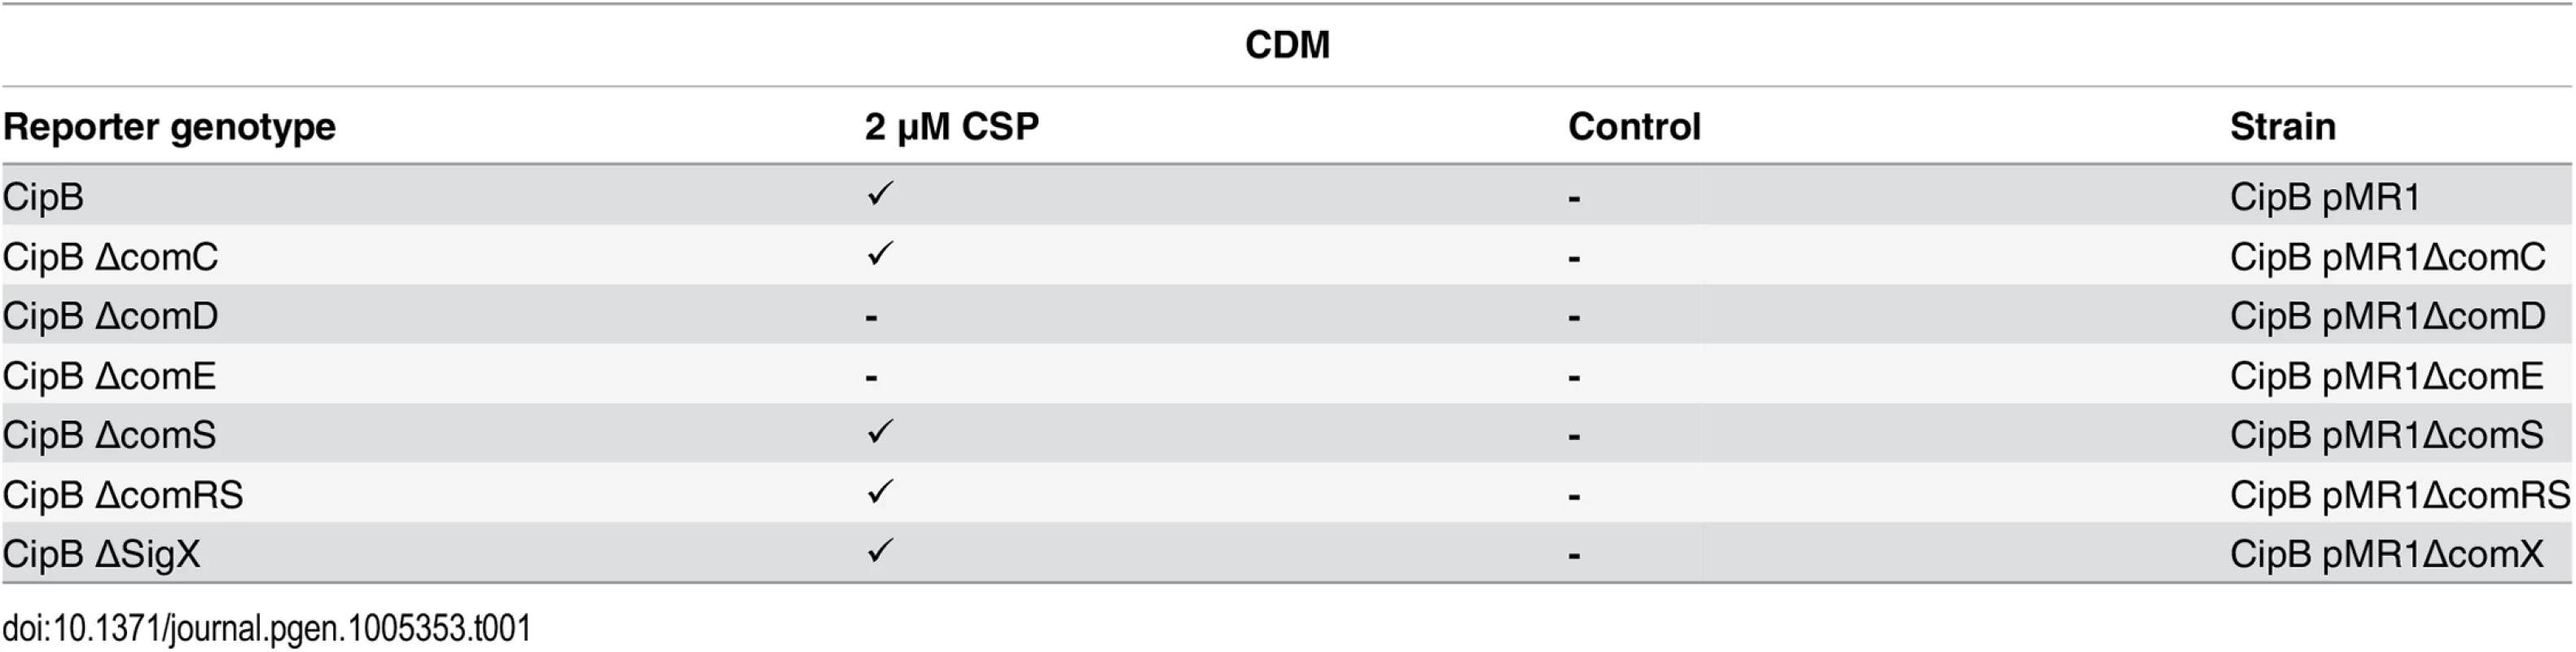 Expression of <i>cipB</i> in different gene deletion background in CDM under CSP induced conditions.